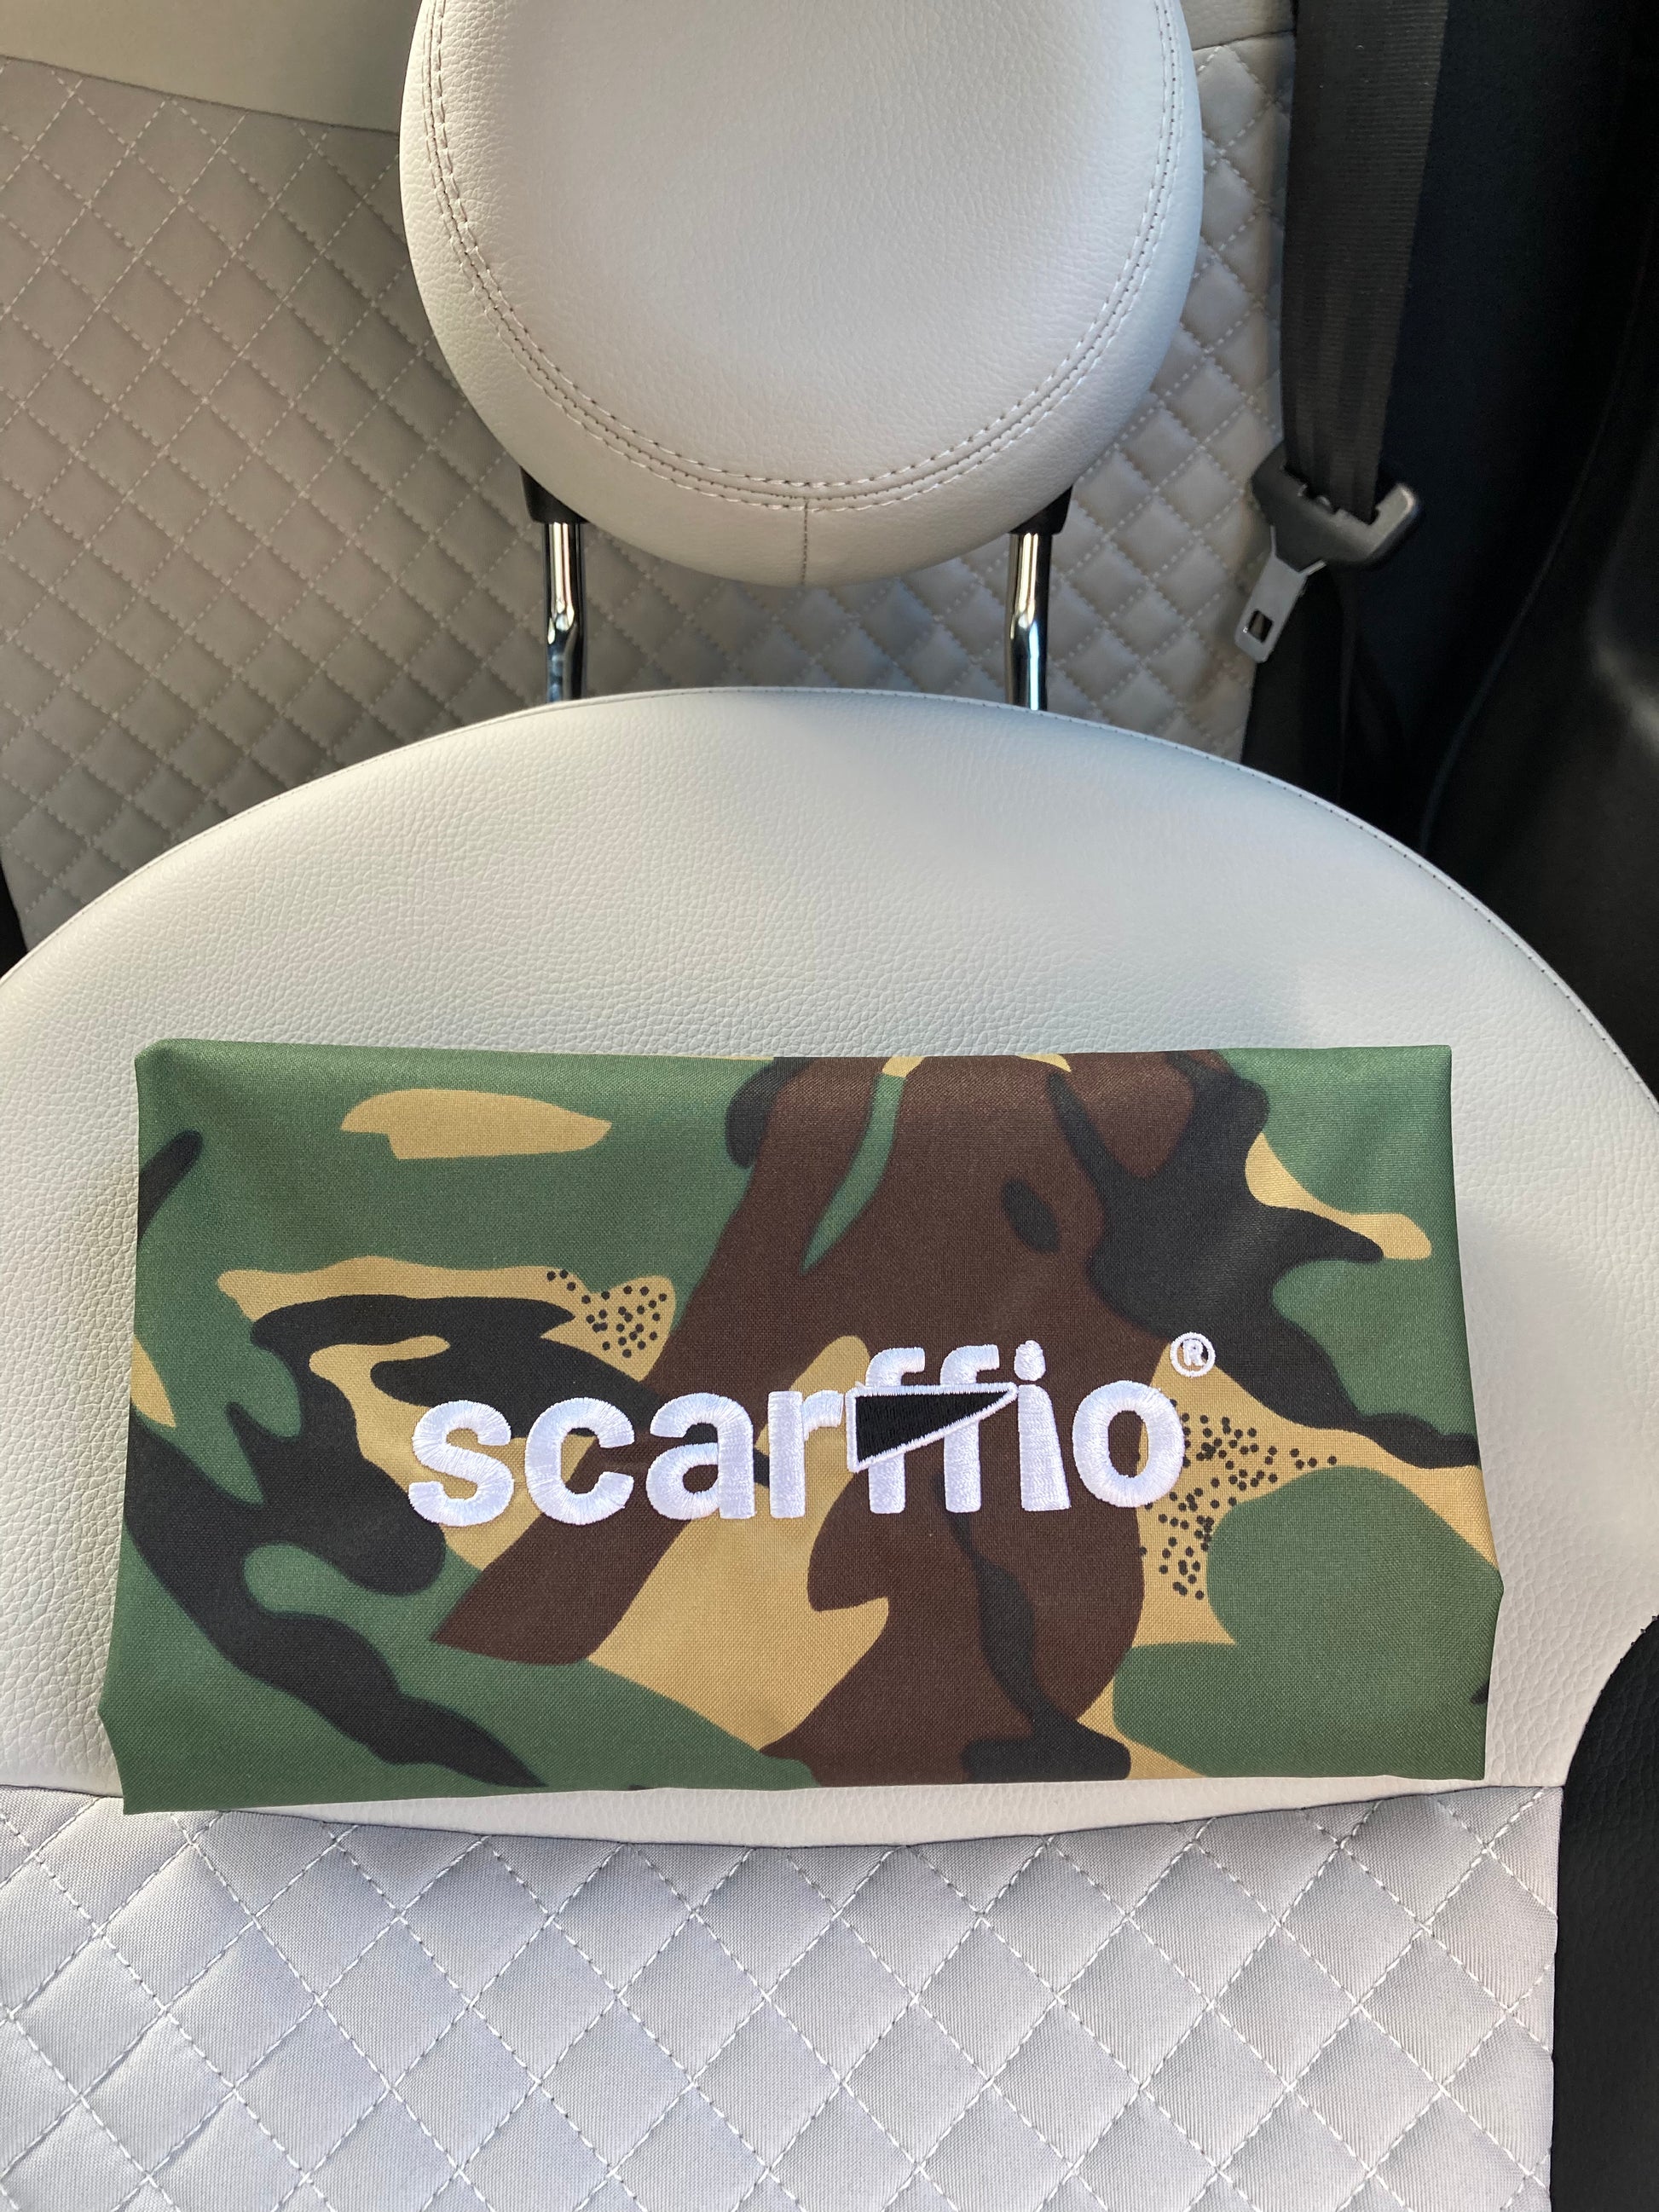 This image shows a a folded Camo scarffio®, resting on a cream and black quilted car seat. The focus of the image is  the white embroidered scarffio®  logo with its' contrasting black cape detail. 